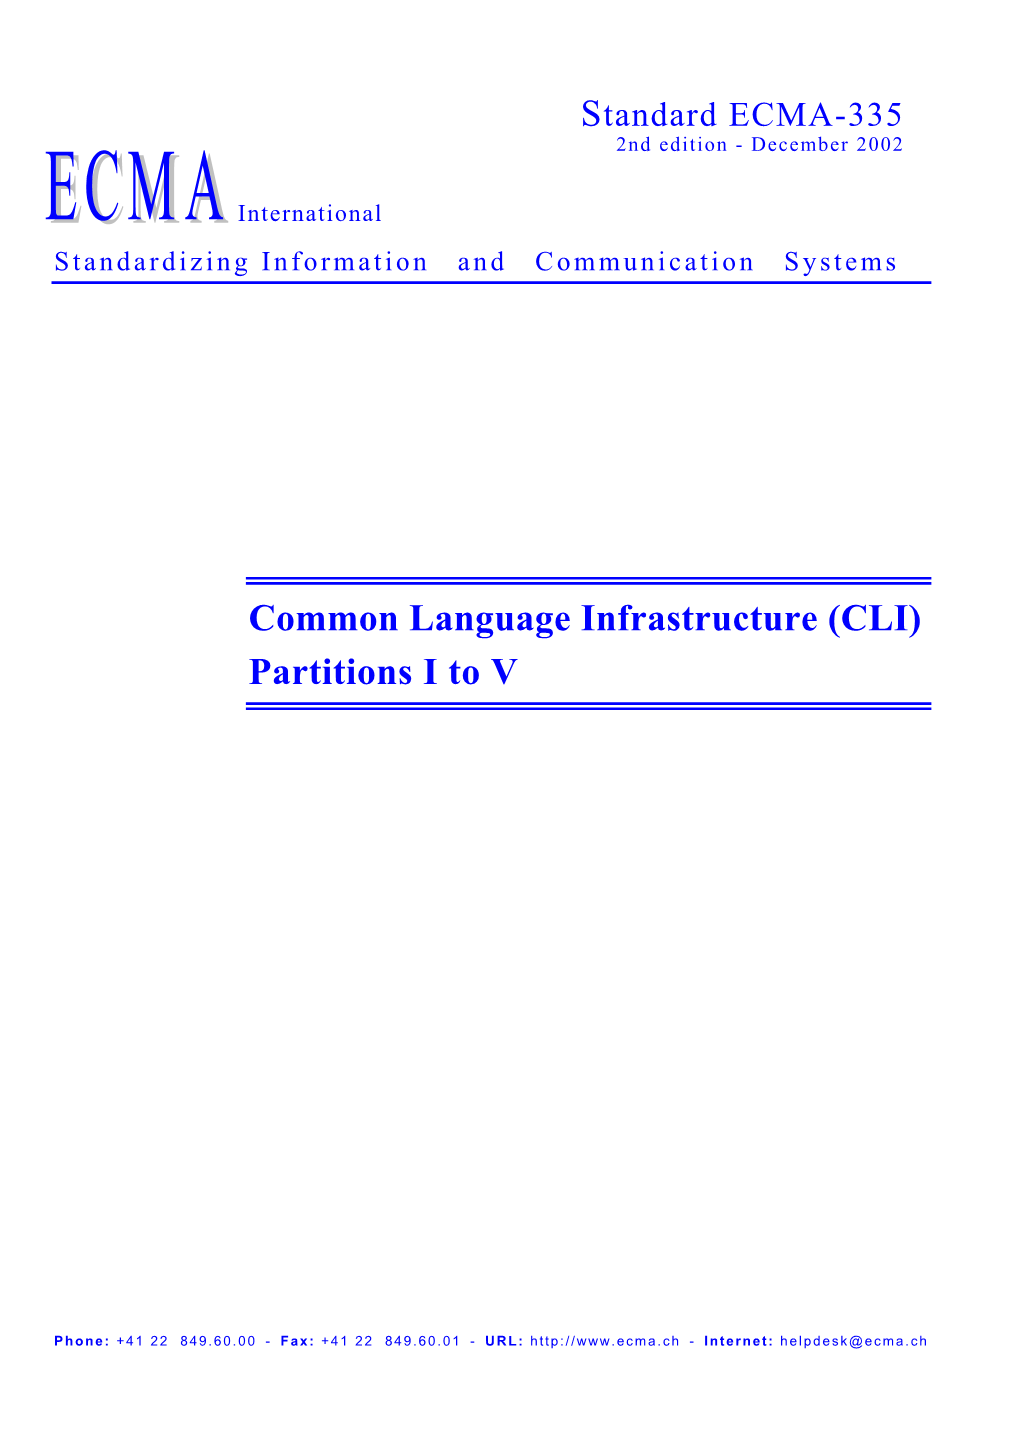 Common Language Infrastructure (CLI) Partitions I to V